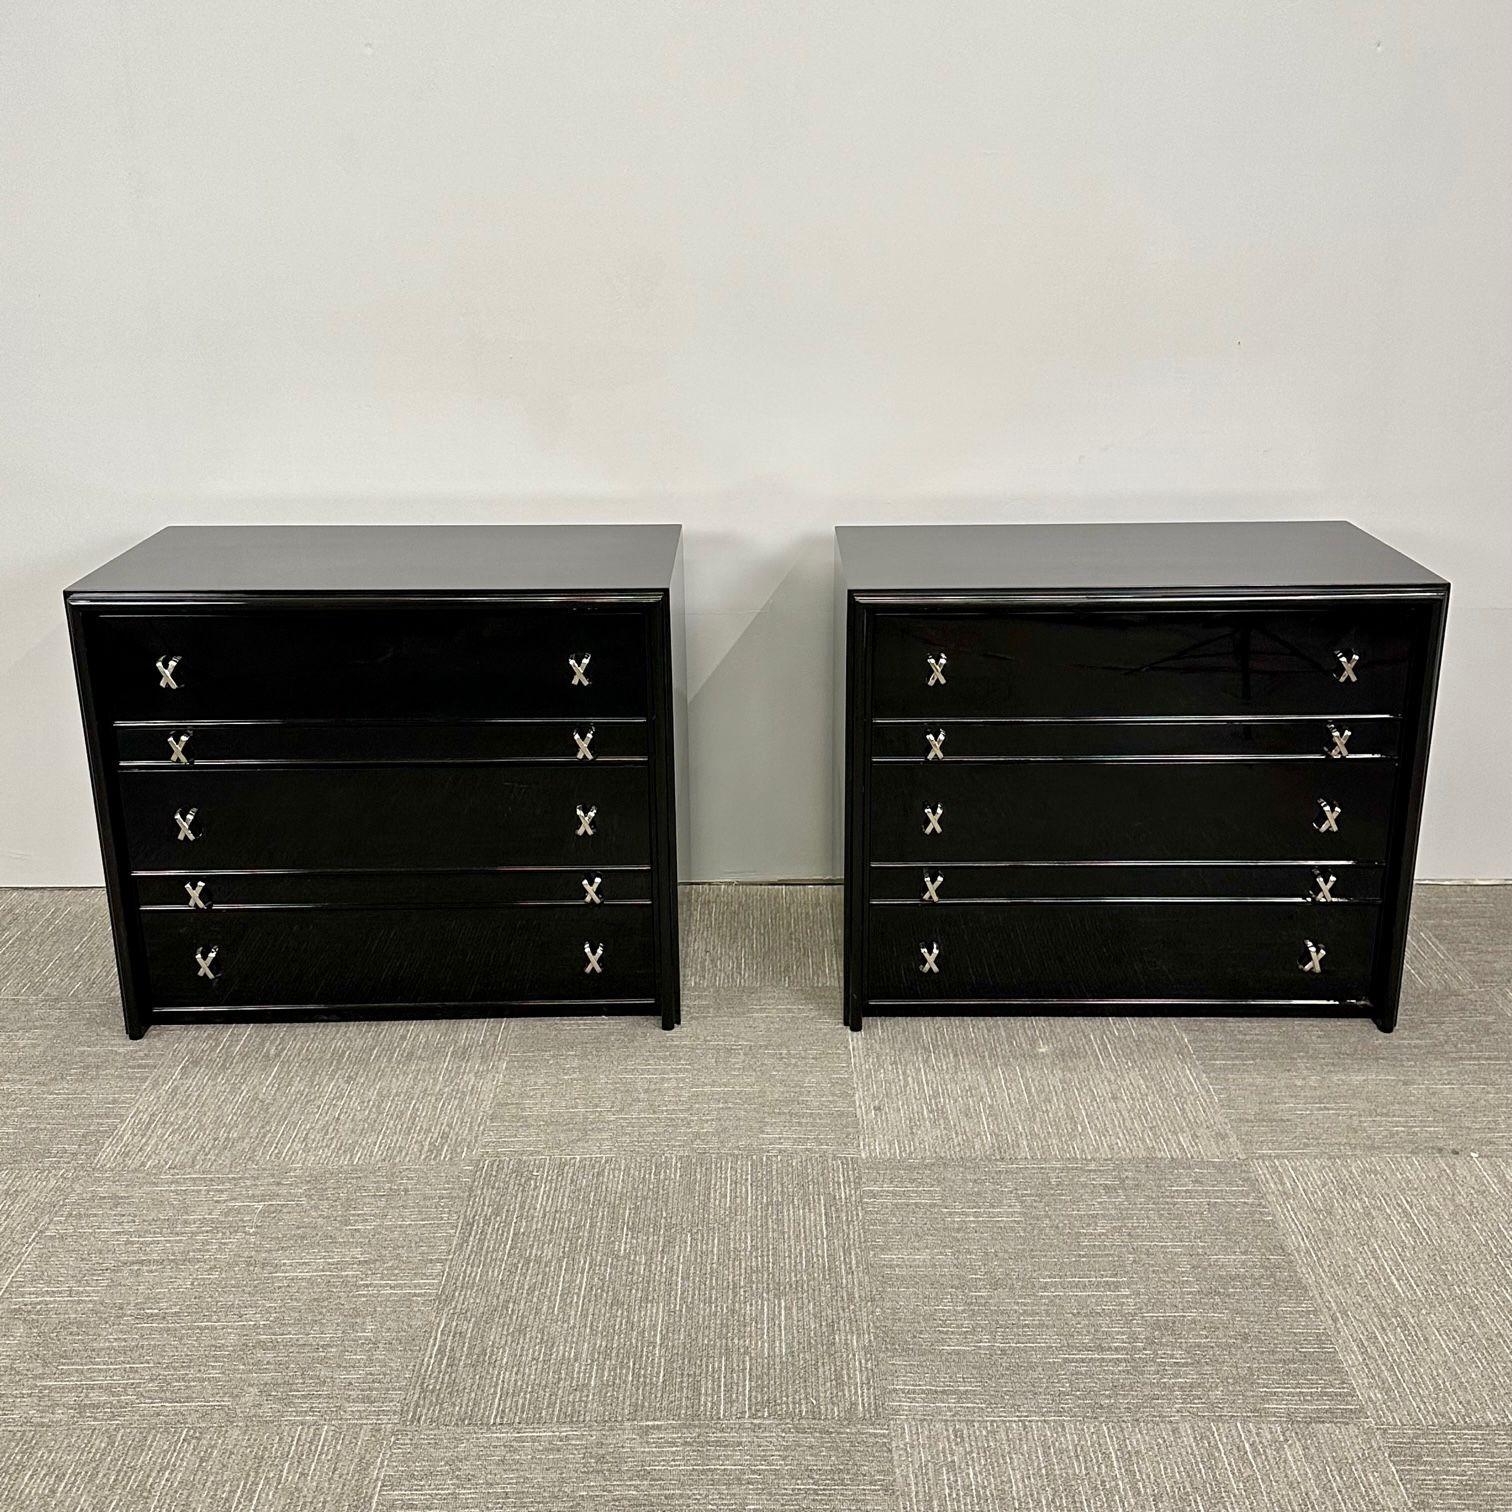 Pair Mid-Century Modern Commodes / Nightstands, Paul Frankl Style, Ebony Lacquer
 
Pair of high gloss ebonized wood finished case pieces have x-form chrome dipped drawer pulls. Each of the five drawers have two mid-century inspired drawer pulls